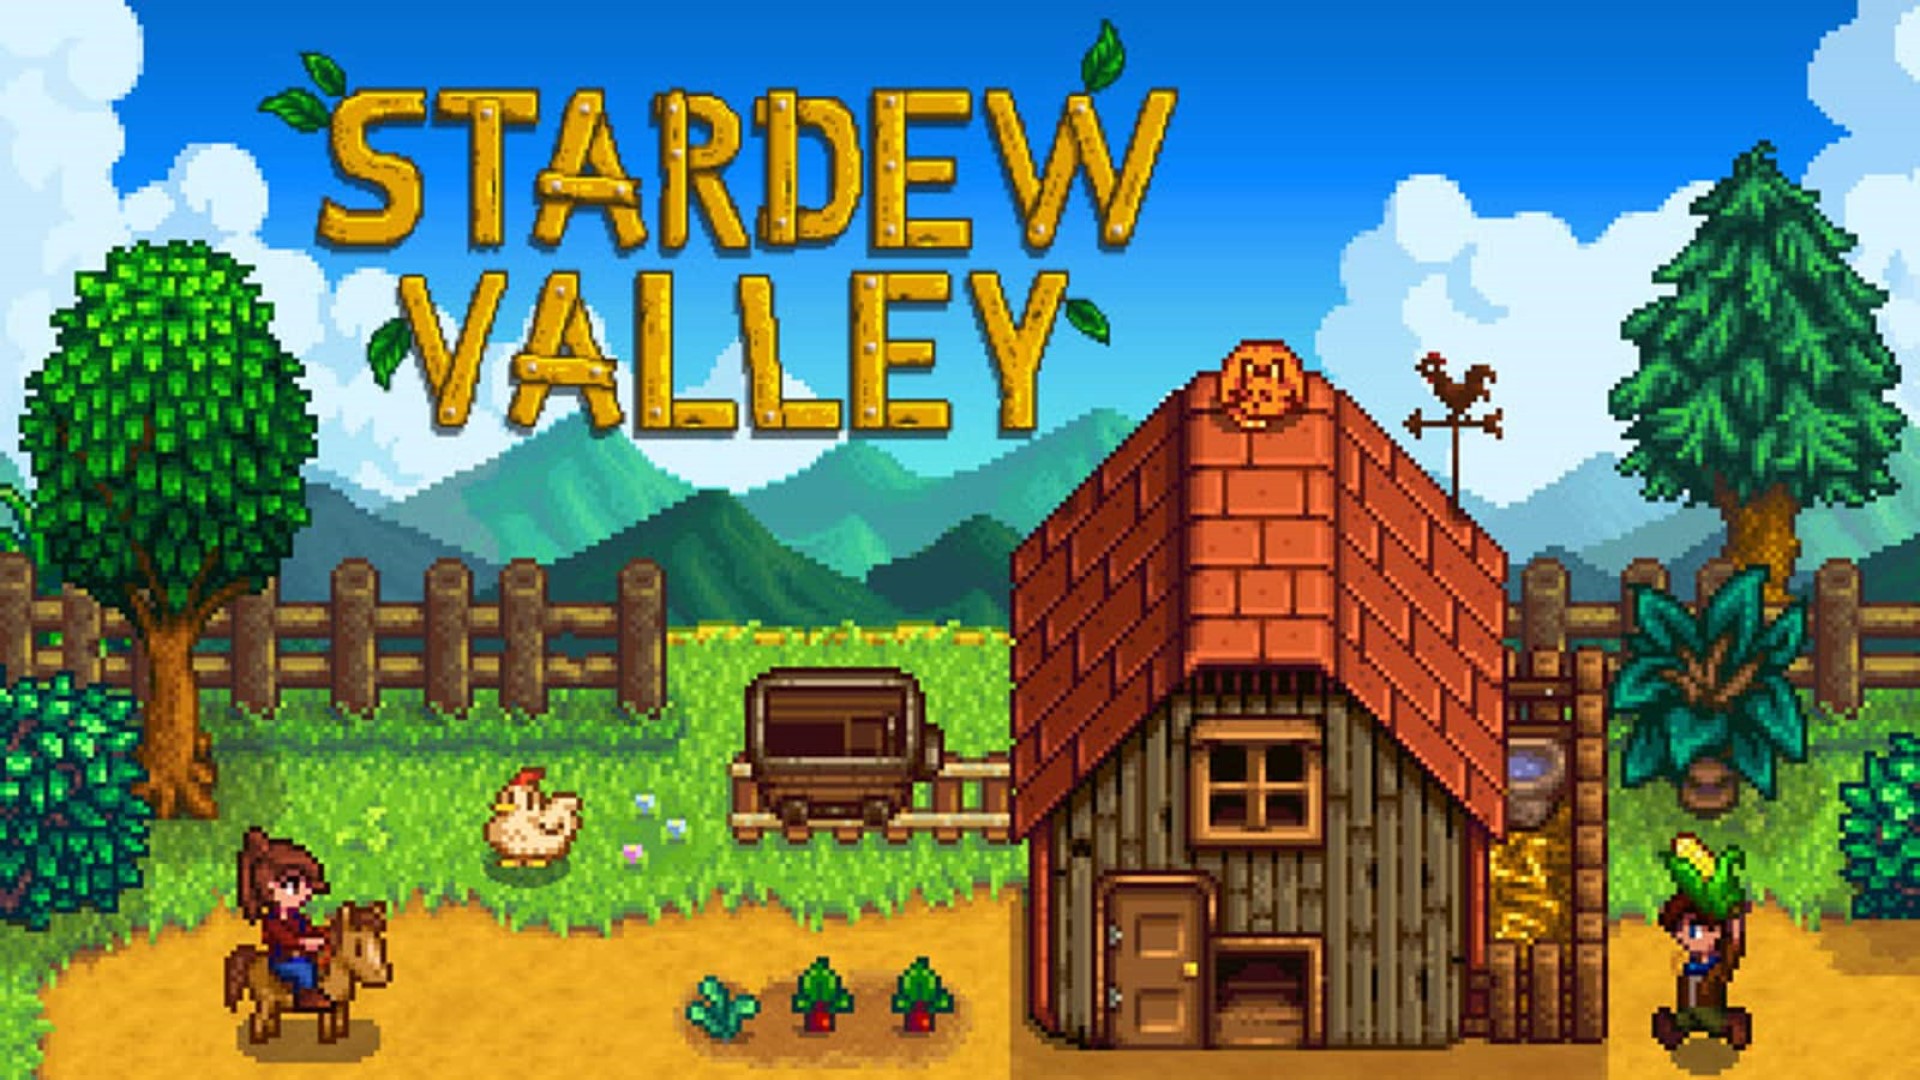 Stardew Valley Developer Teases New Festival, Items and Secrets in Update 1.6